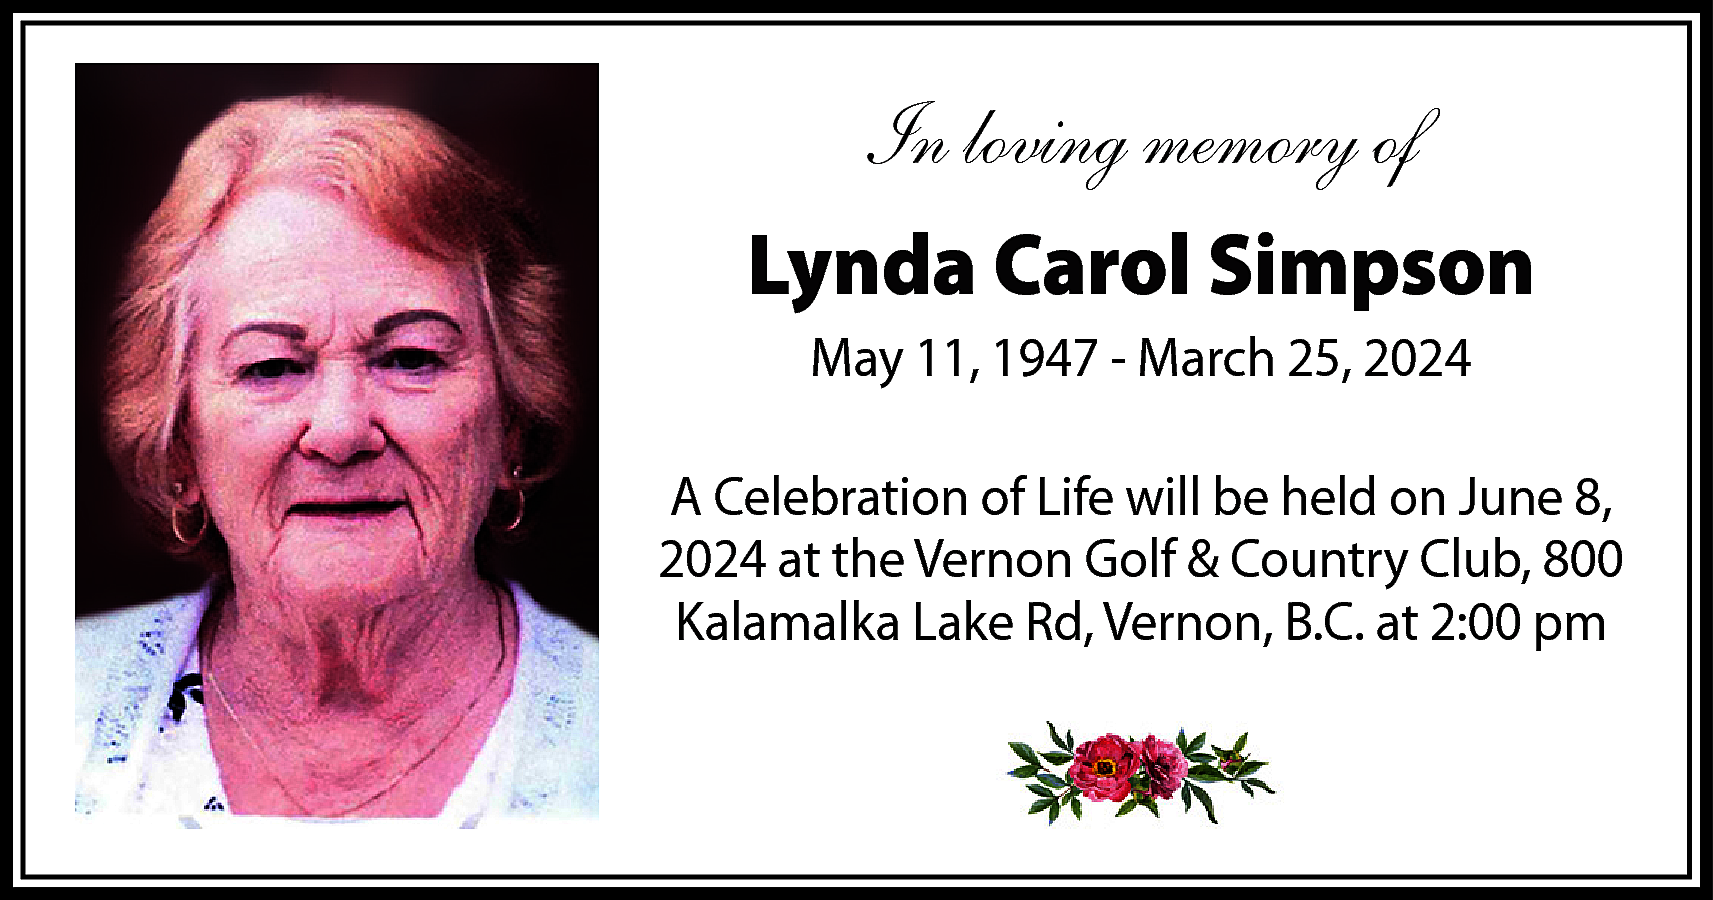 In loving memory of <br>Lynda  In loving memory of  Lynda Carol Simpson  May 11, 1947 - March 25, 2024  A Celebration of Life will be held on June 8,  2024 at the Vernon Golf & Country Club, 800  Kalamalka Lake Rd, Vernon, B.C. at 2:00 pm    